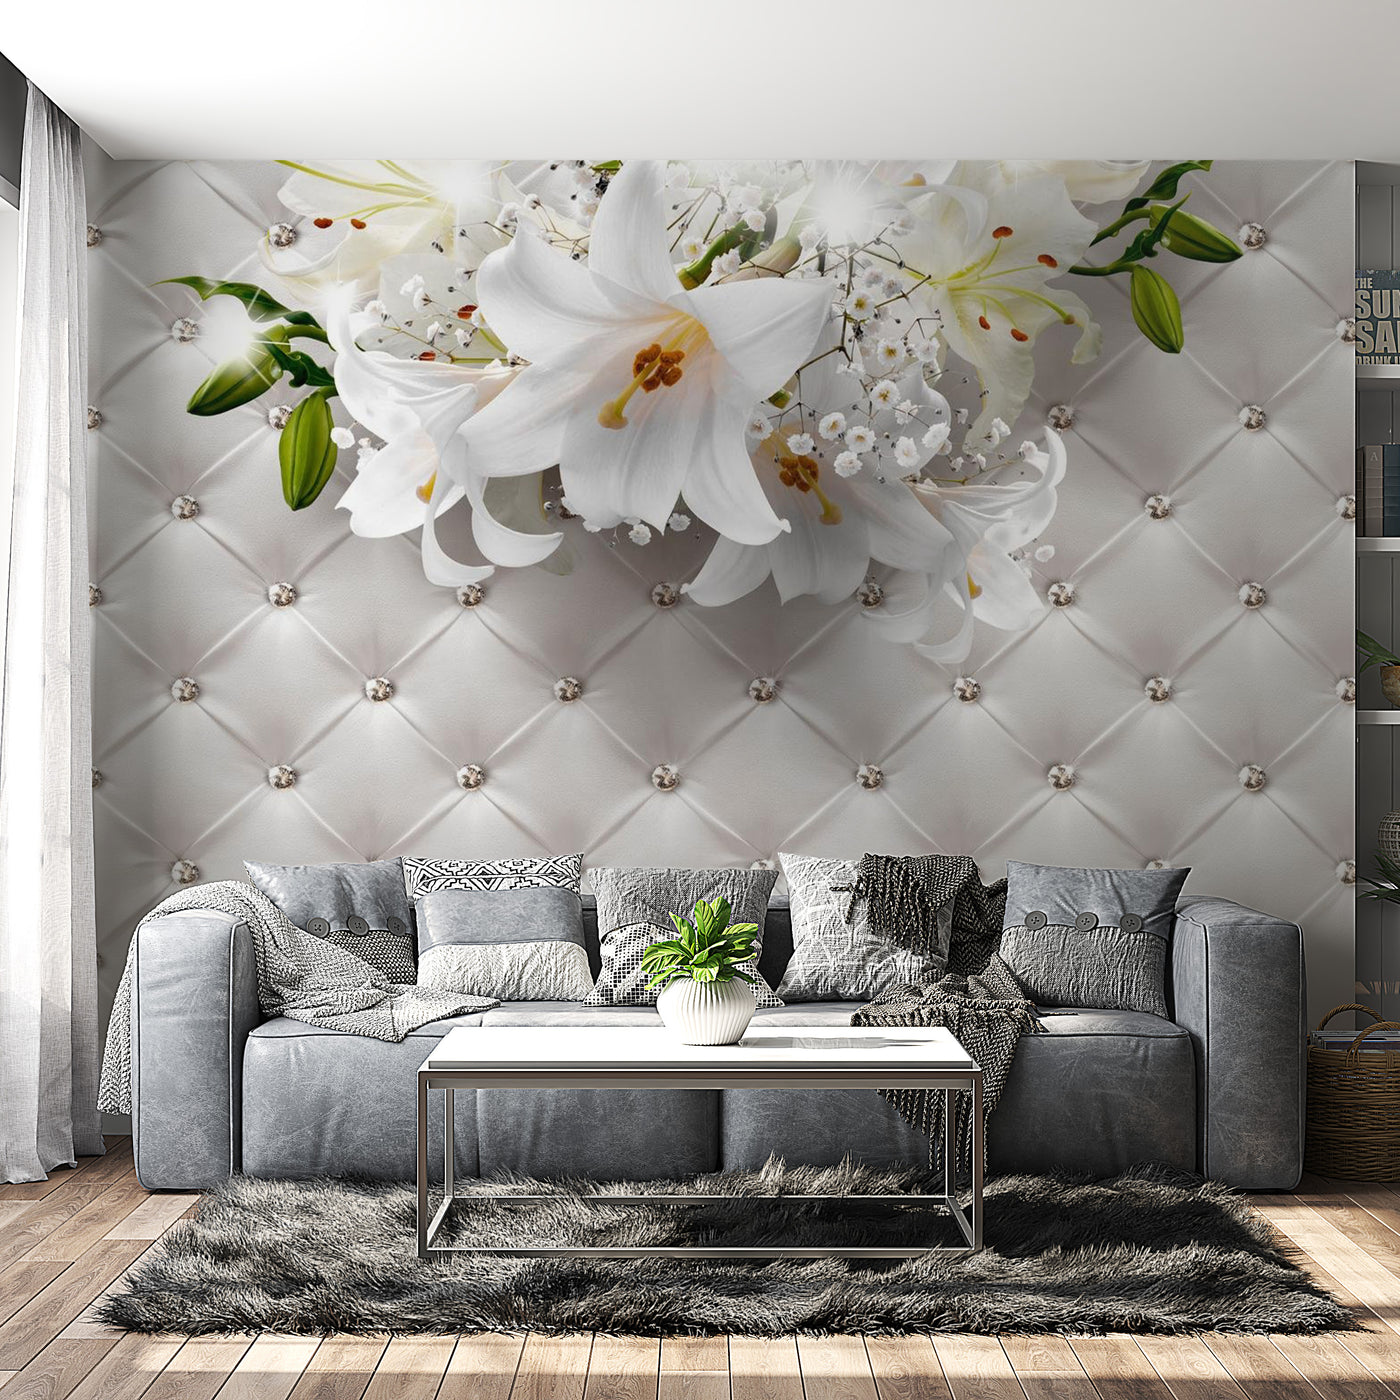 Peel & Stick Floral Wall Mural - Princess Of Elegance - Removable Wall Decals